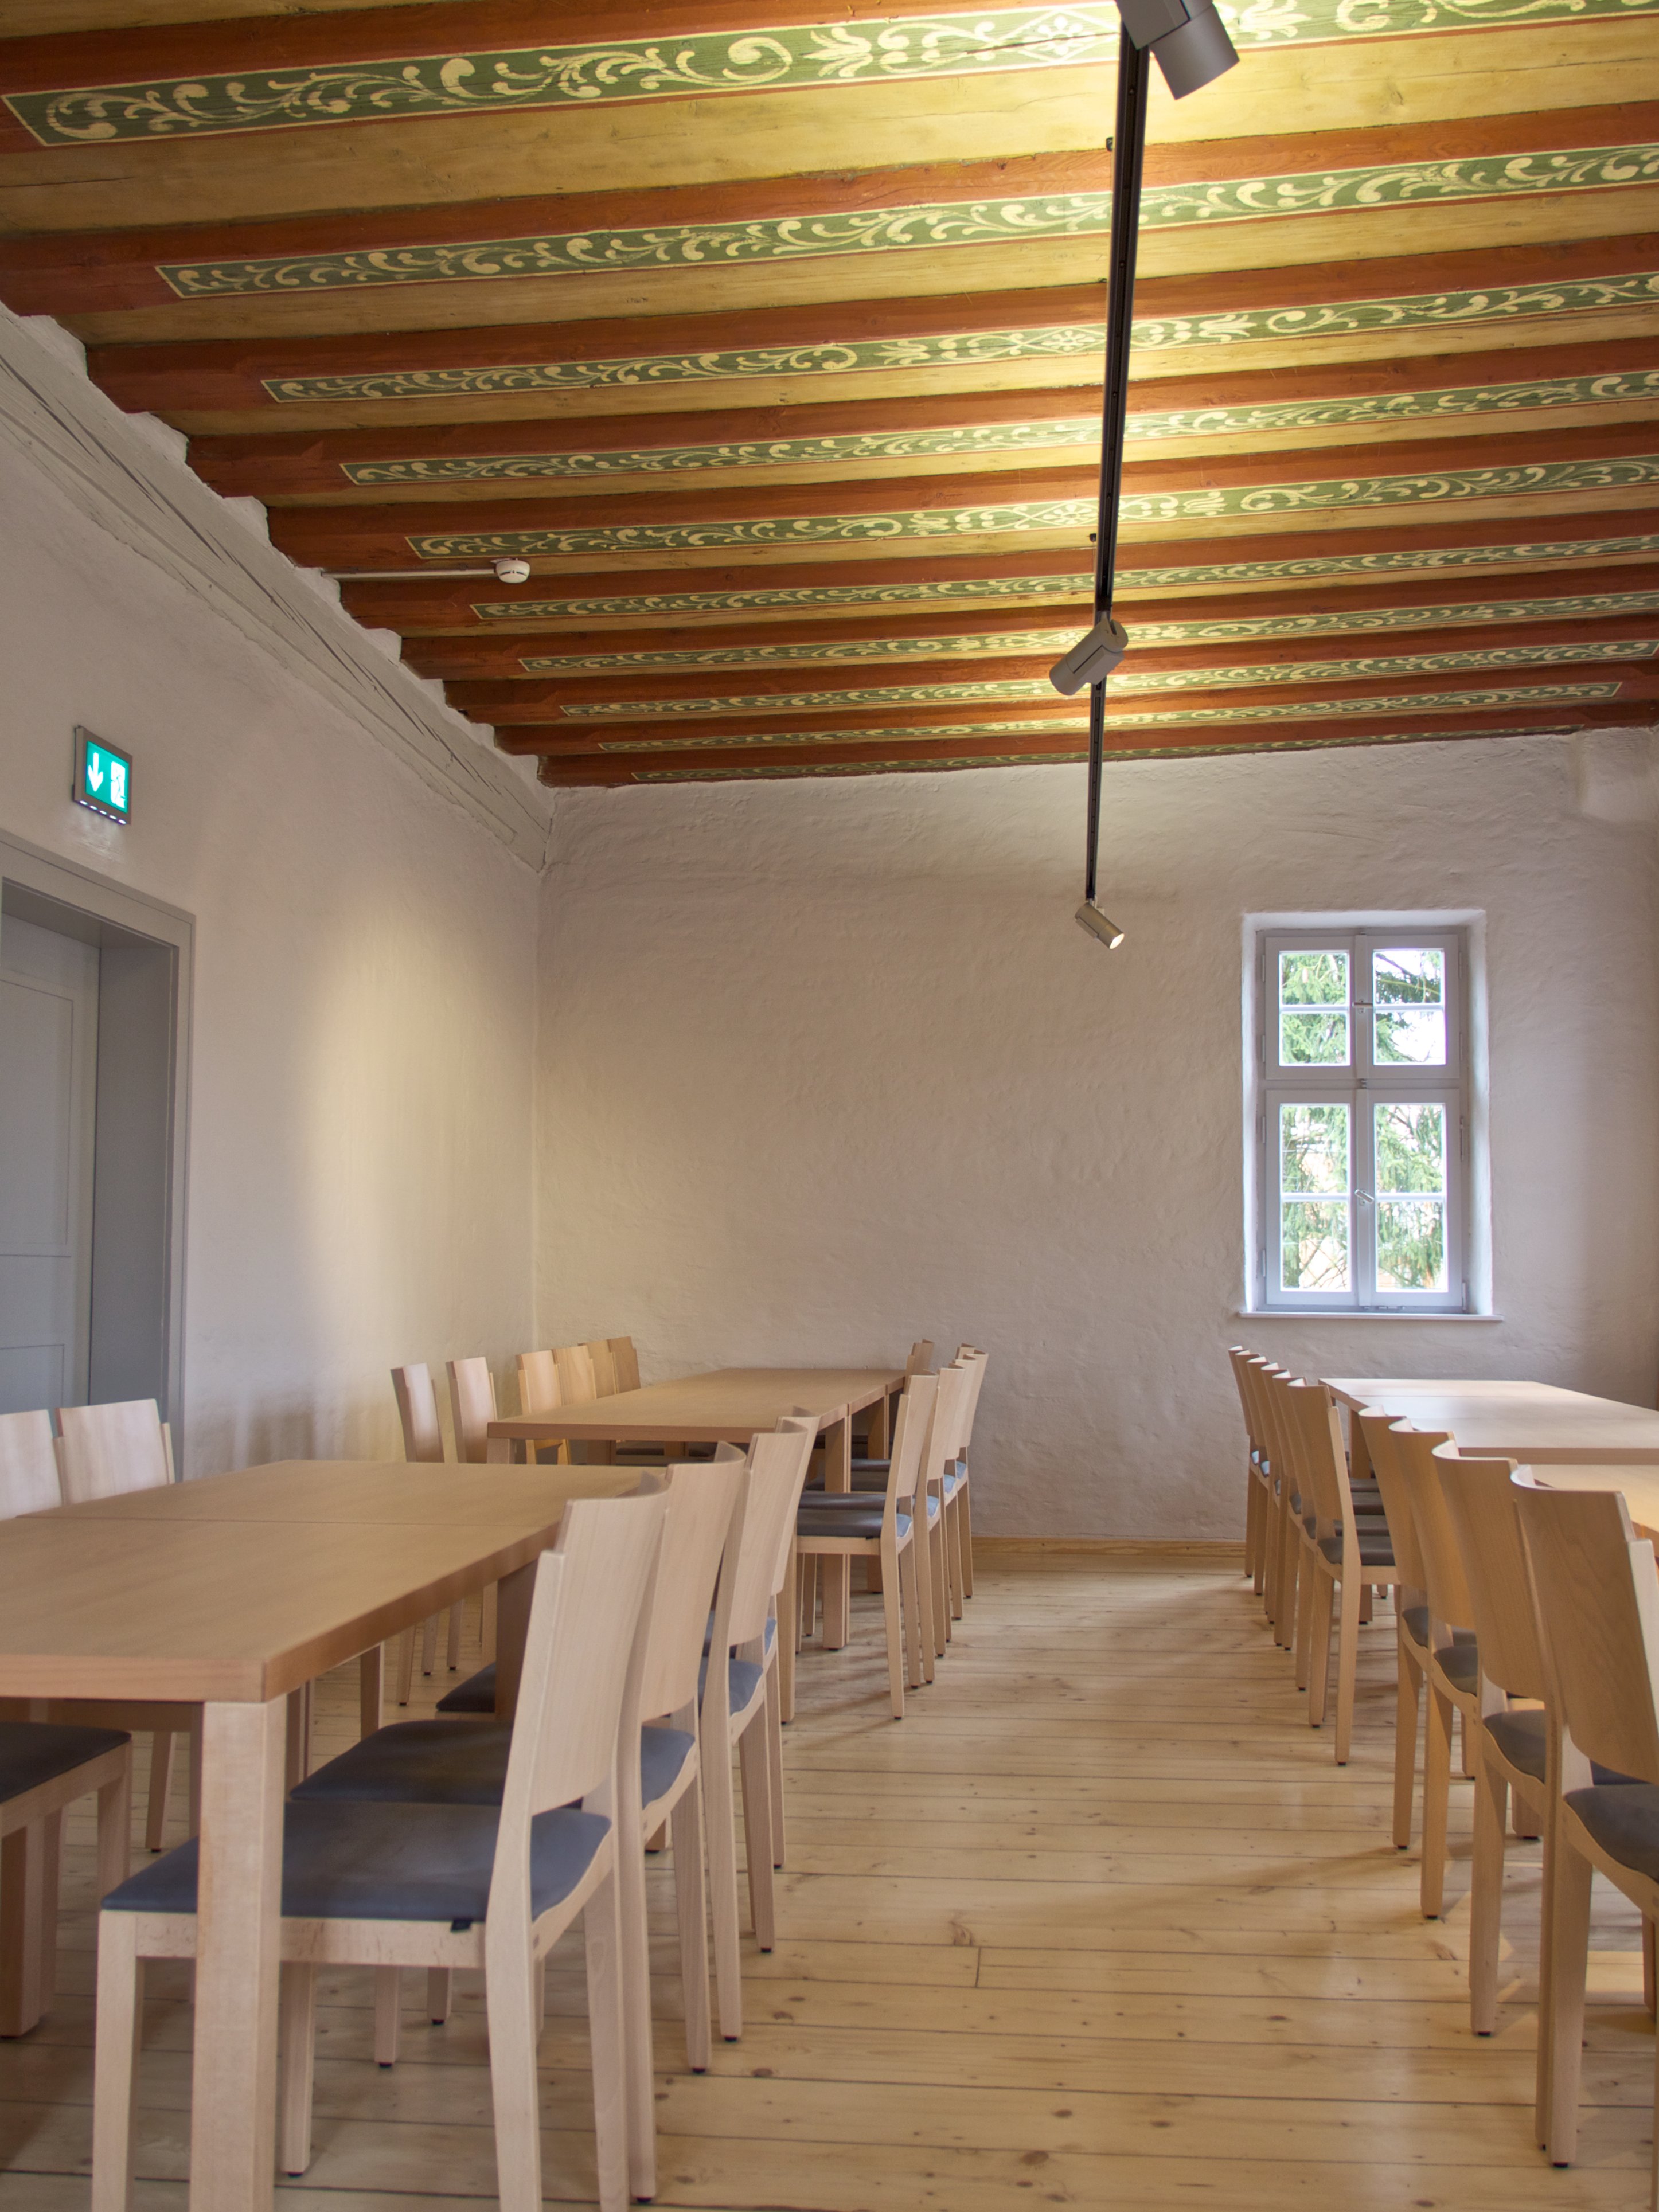 Hall in the Zeidler manor with a painted wooden ceiling